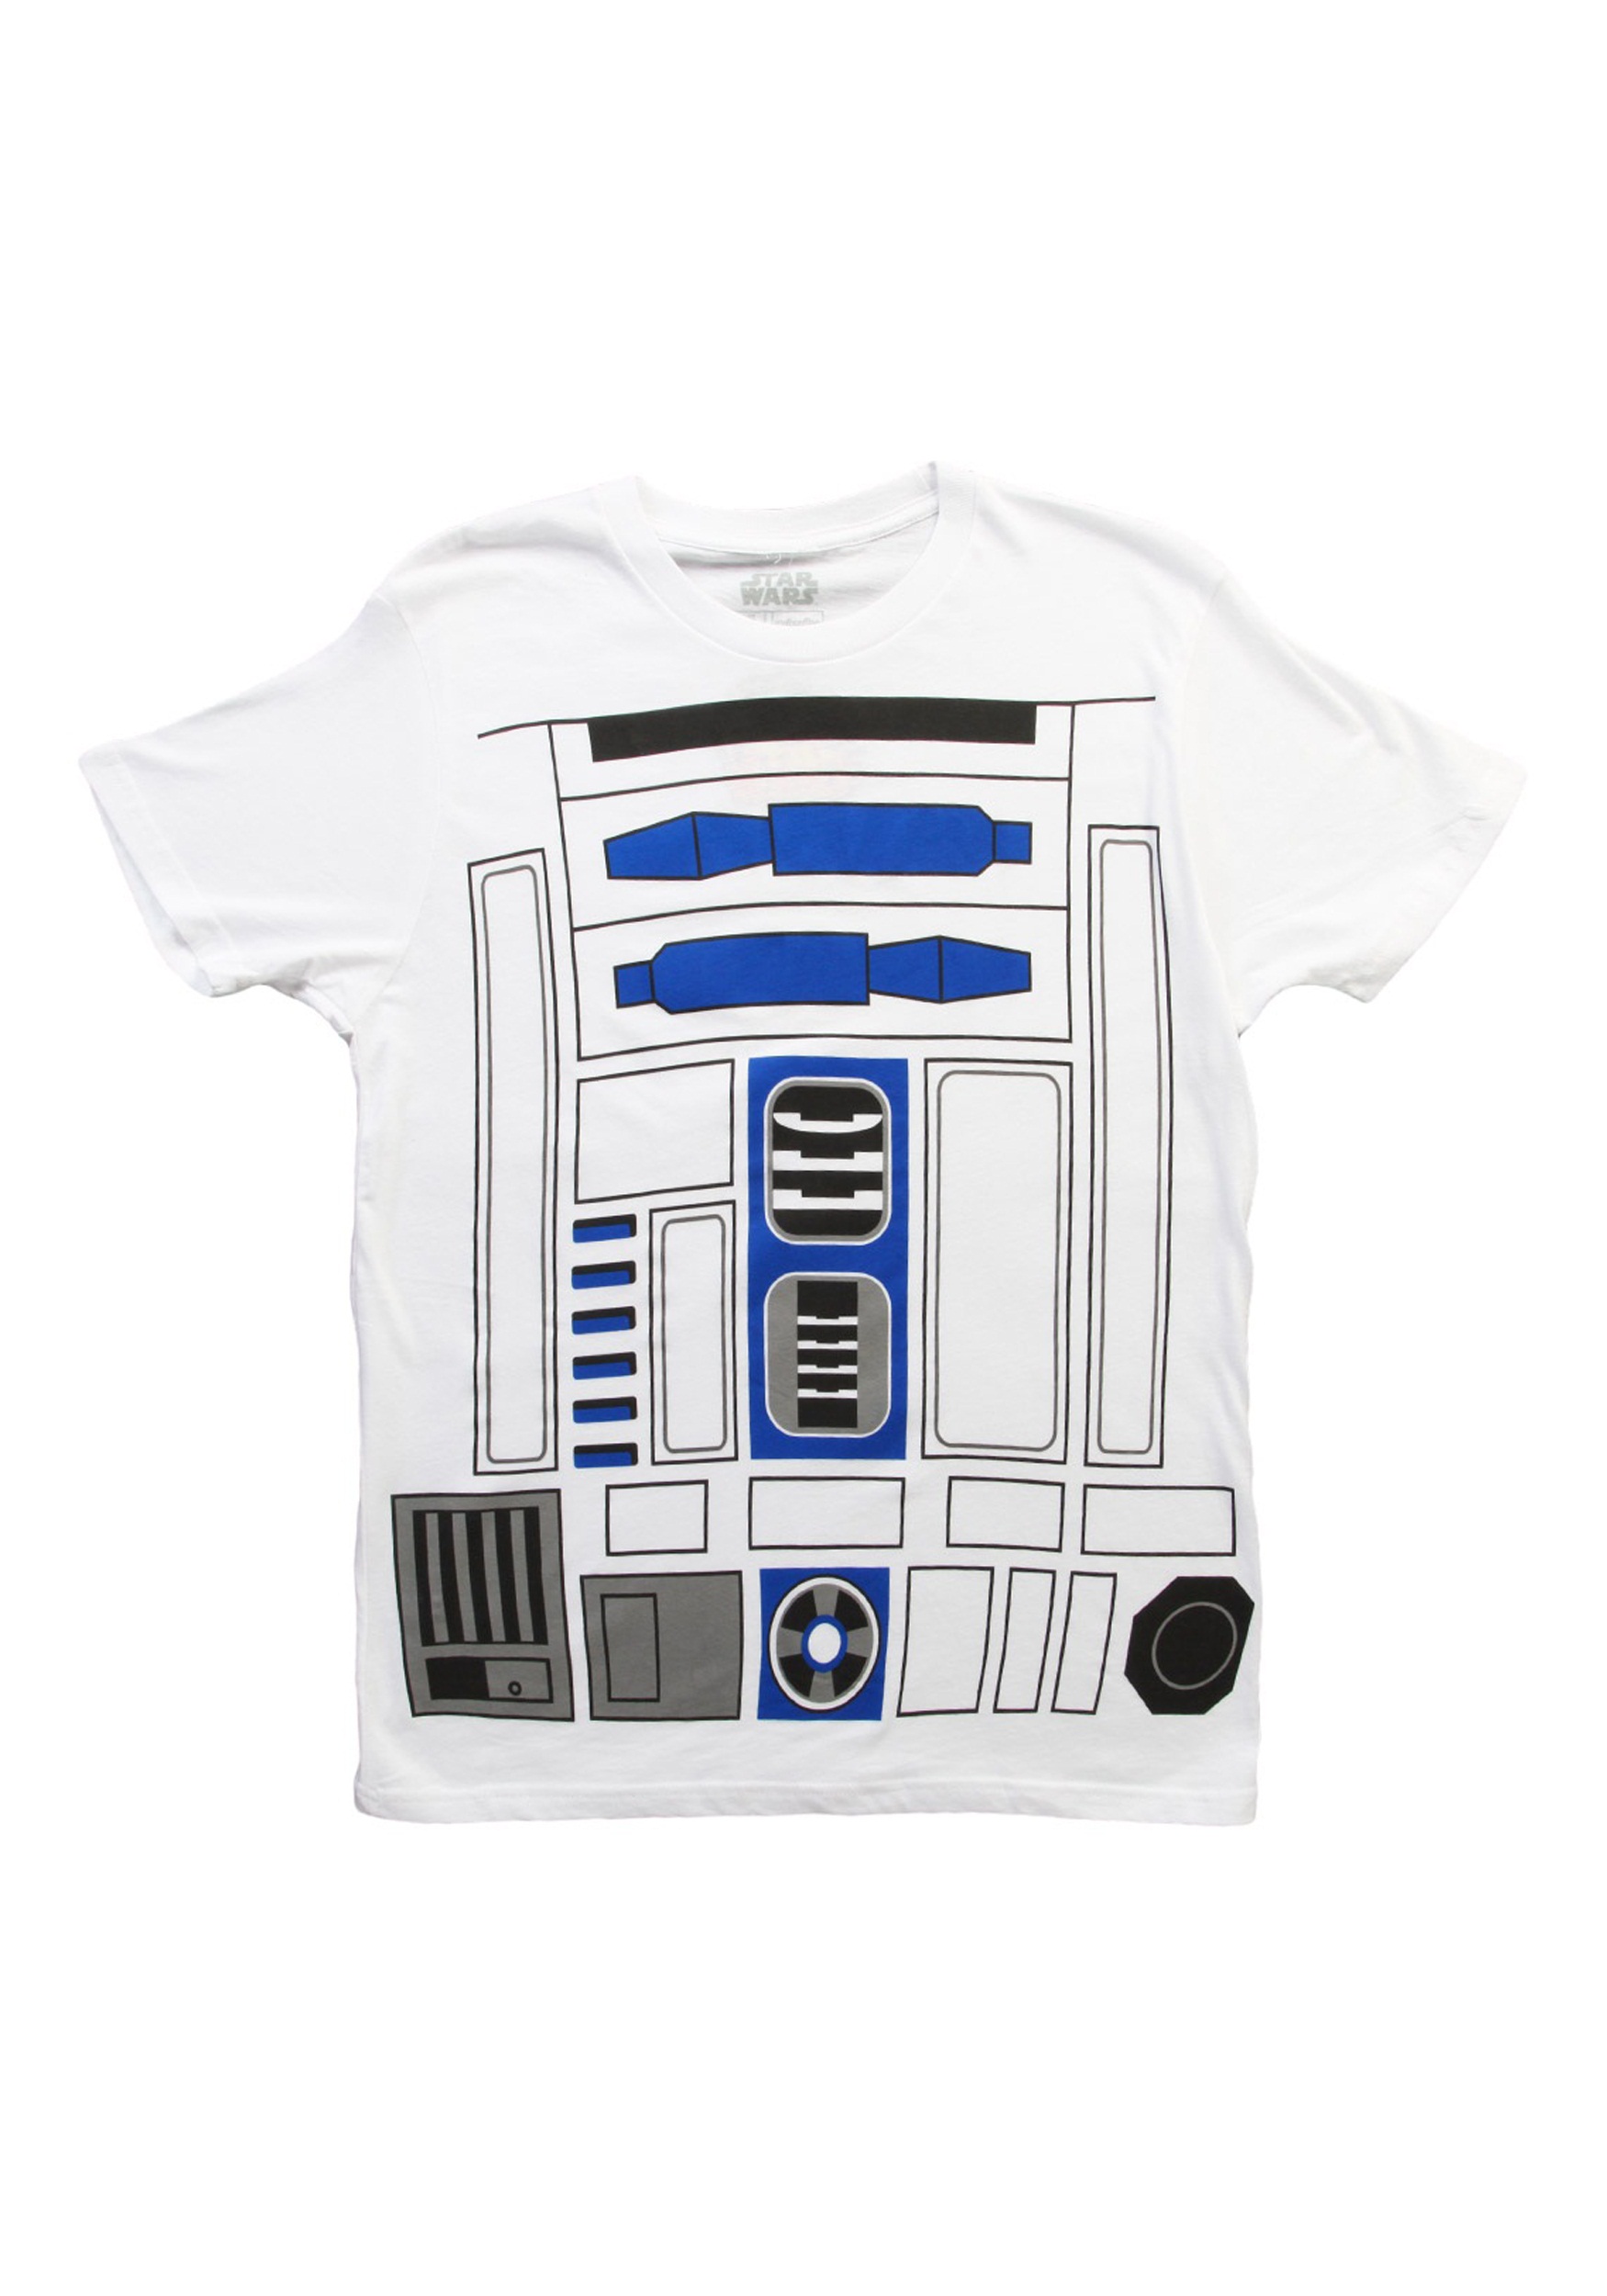 Star Wars - R2D2 Cotumes & Gifts